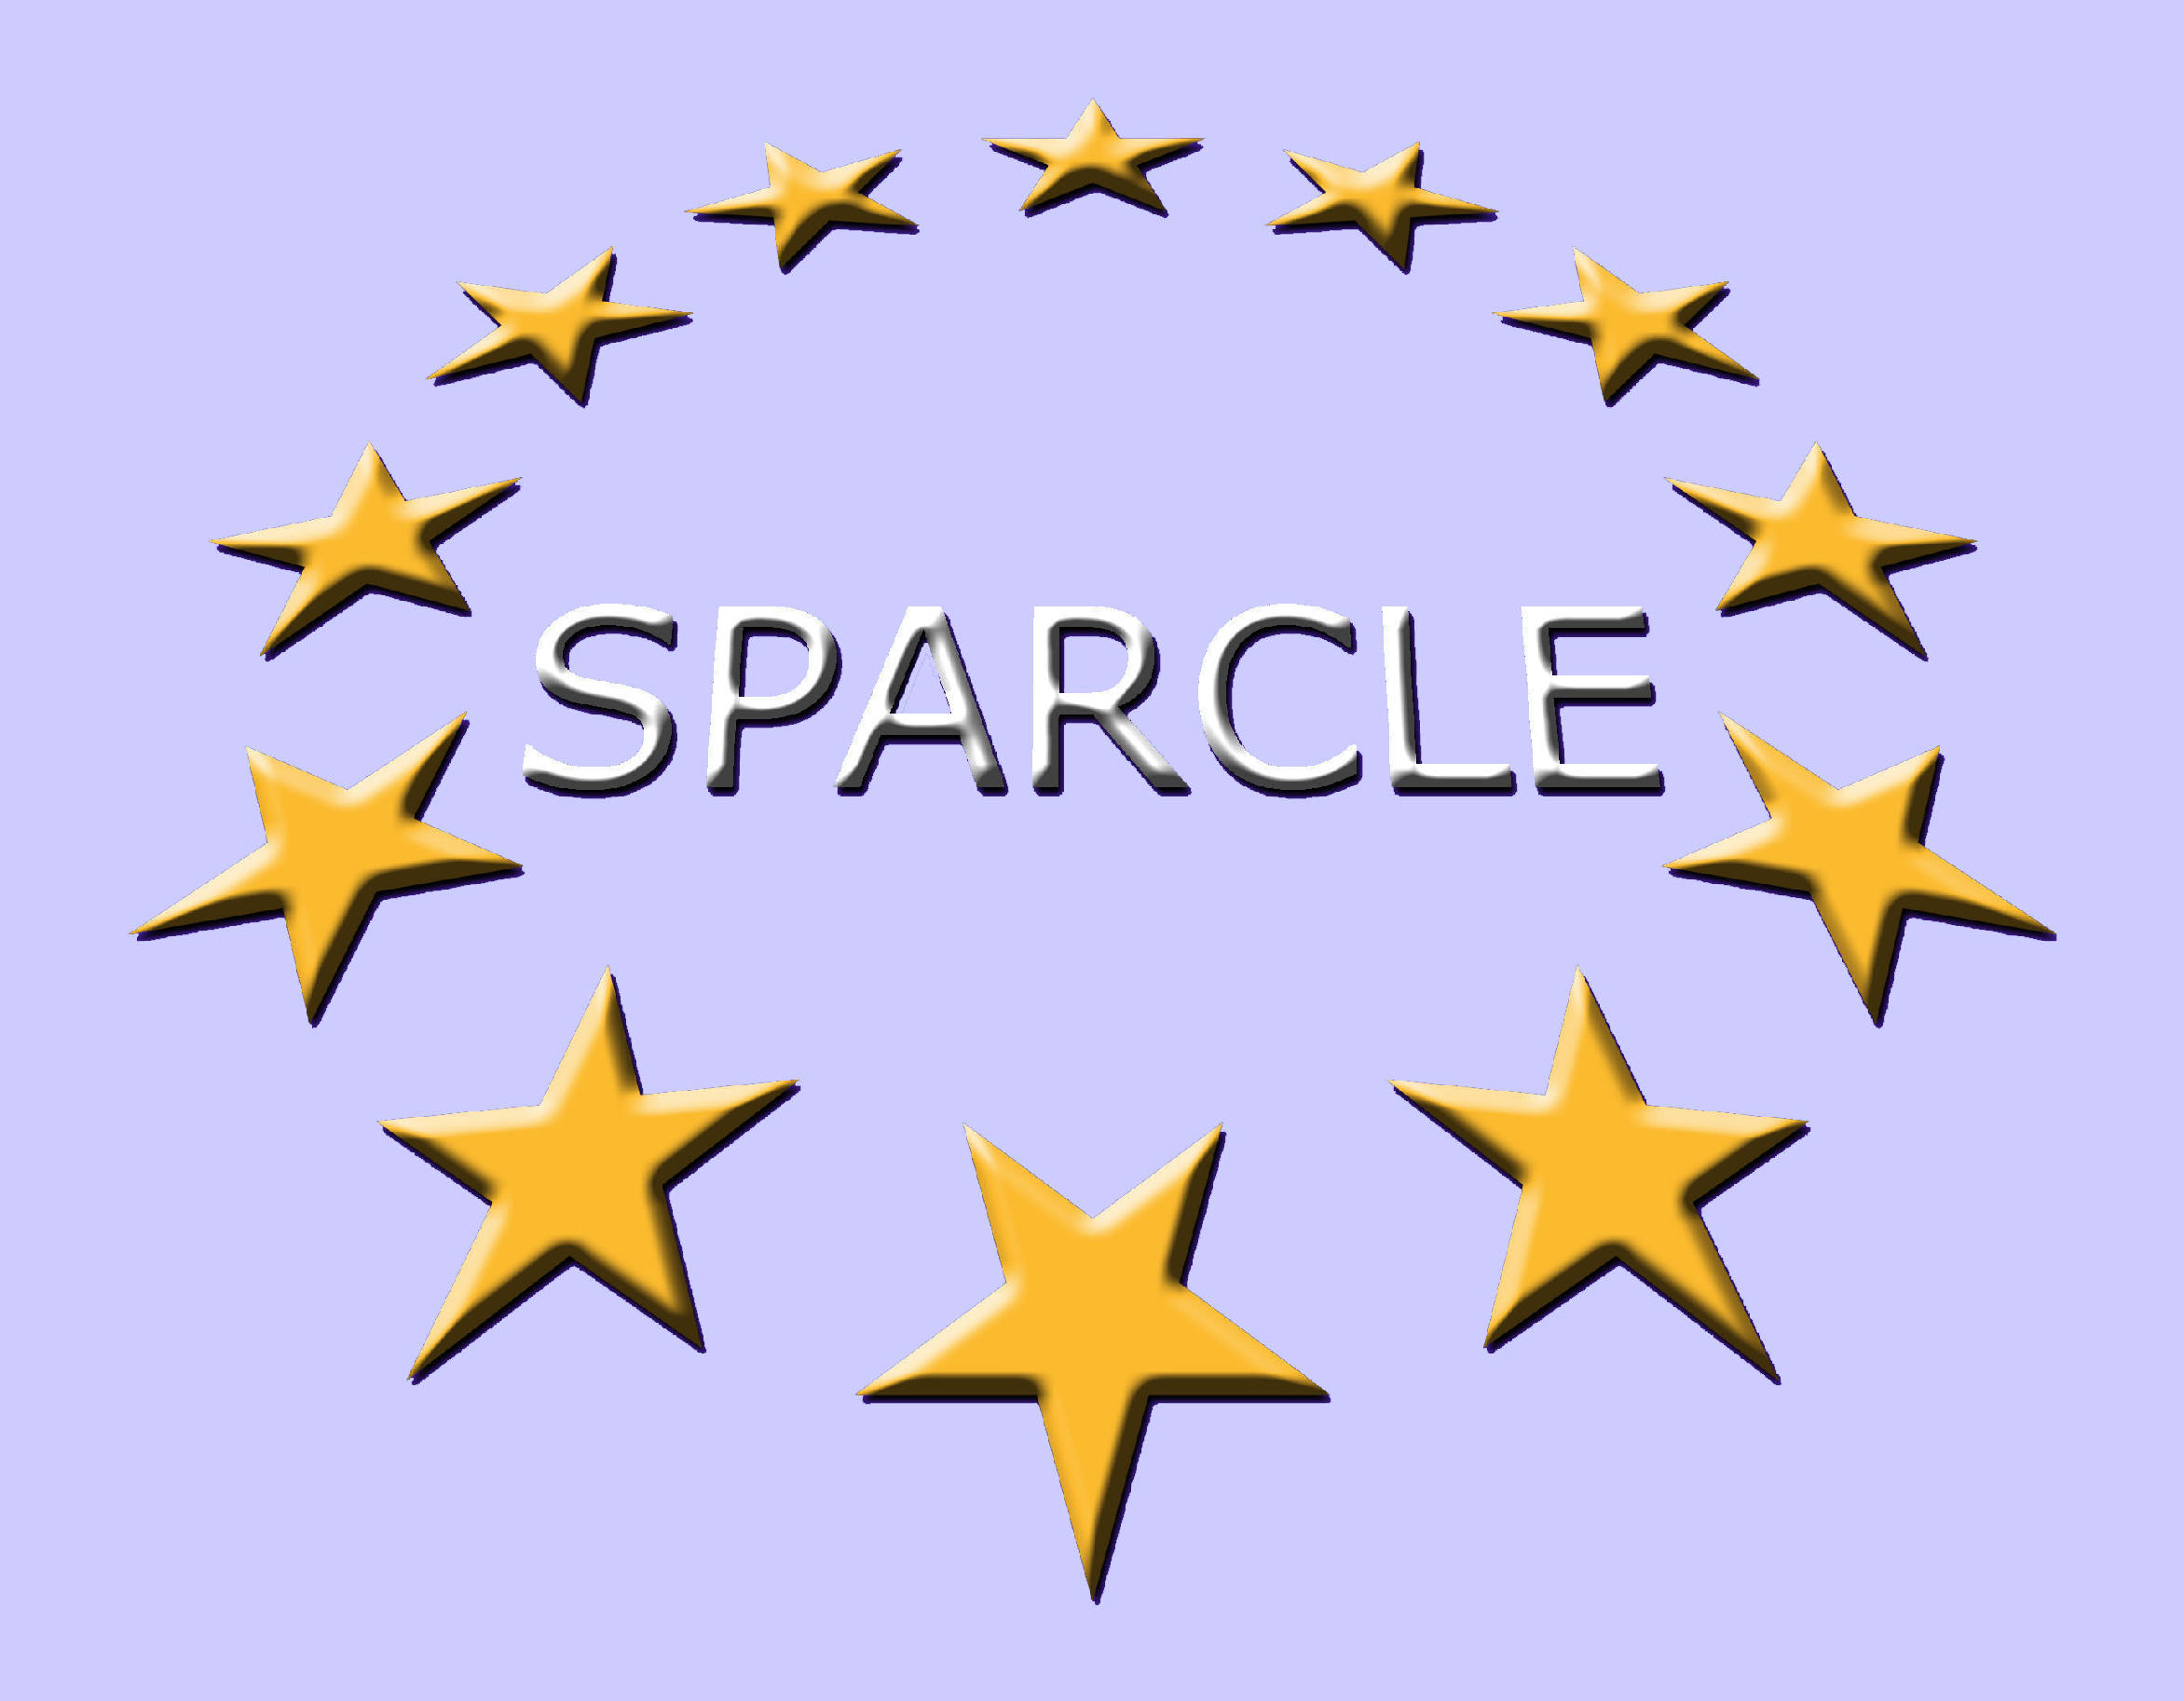 study logo which is made up of yellow stars around the word SPARCLE